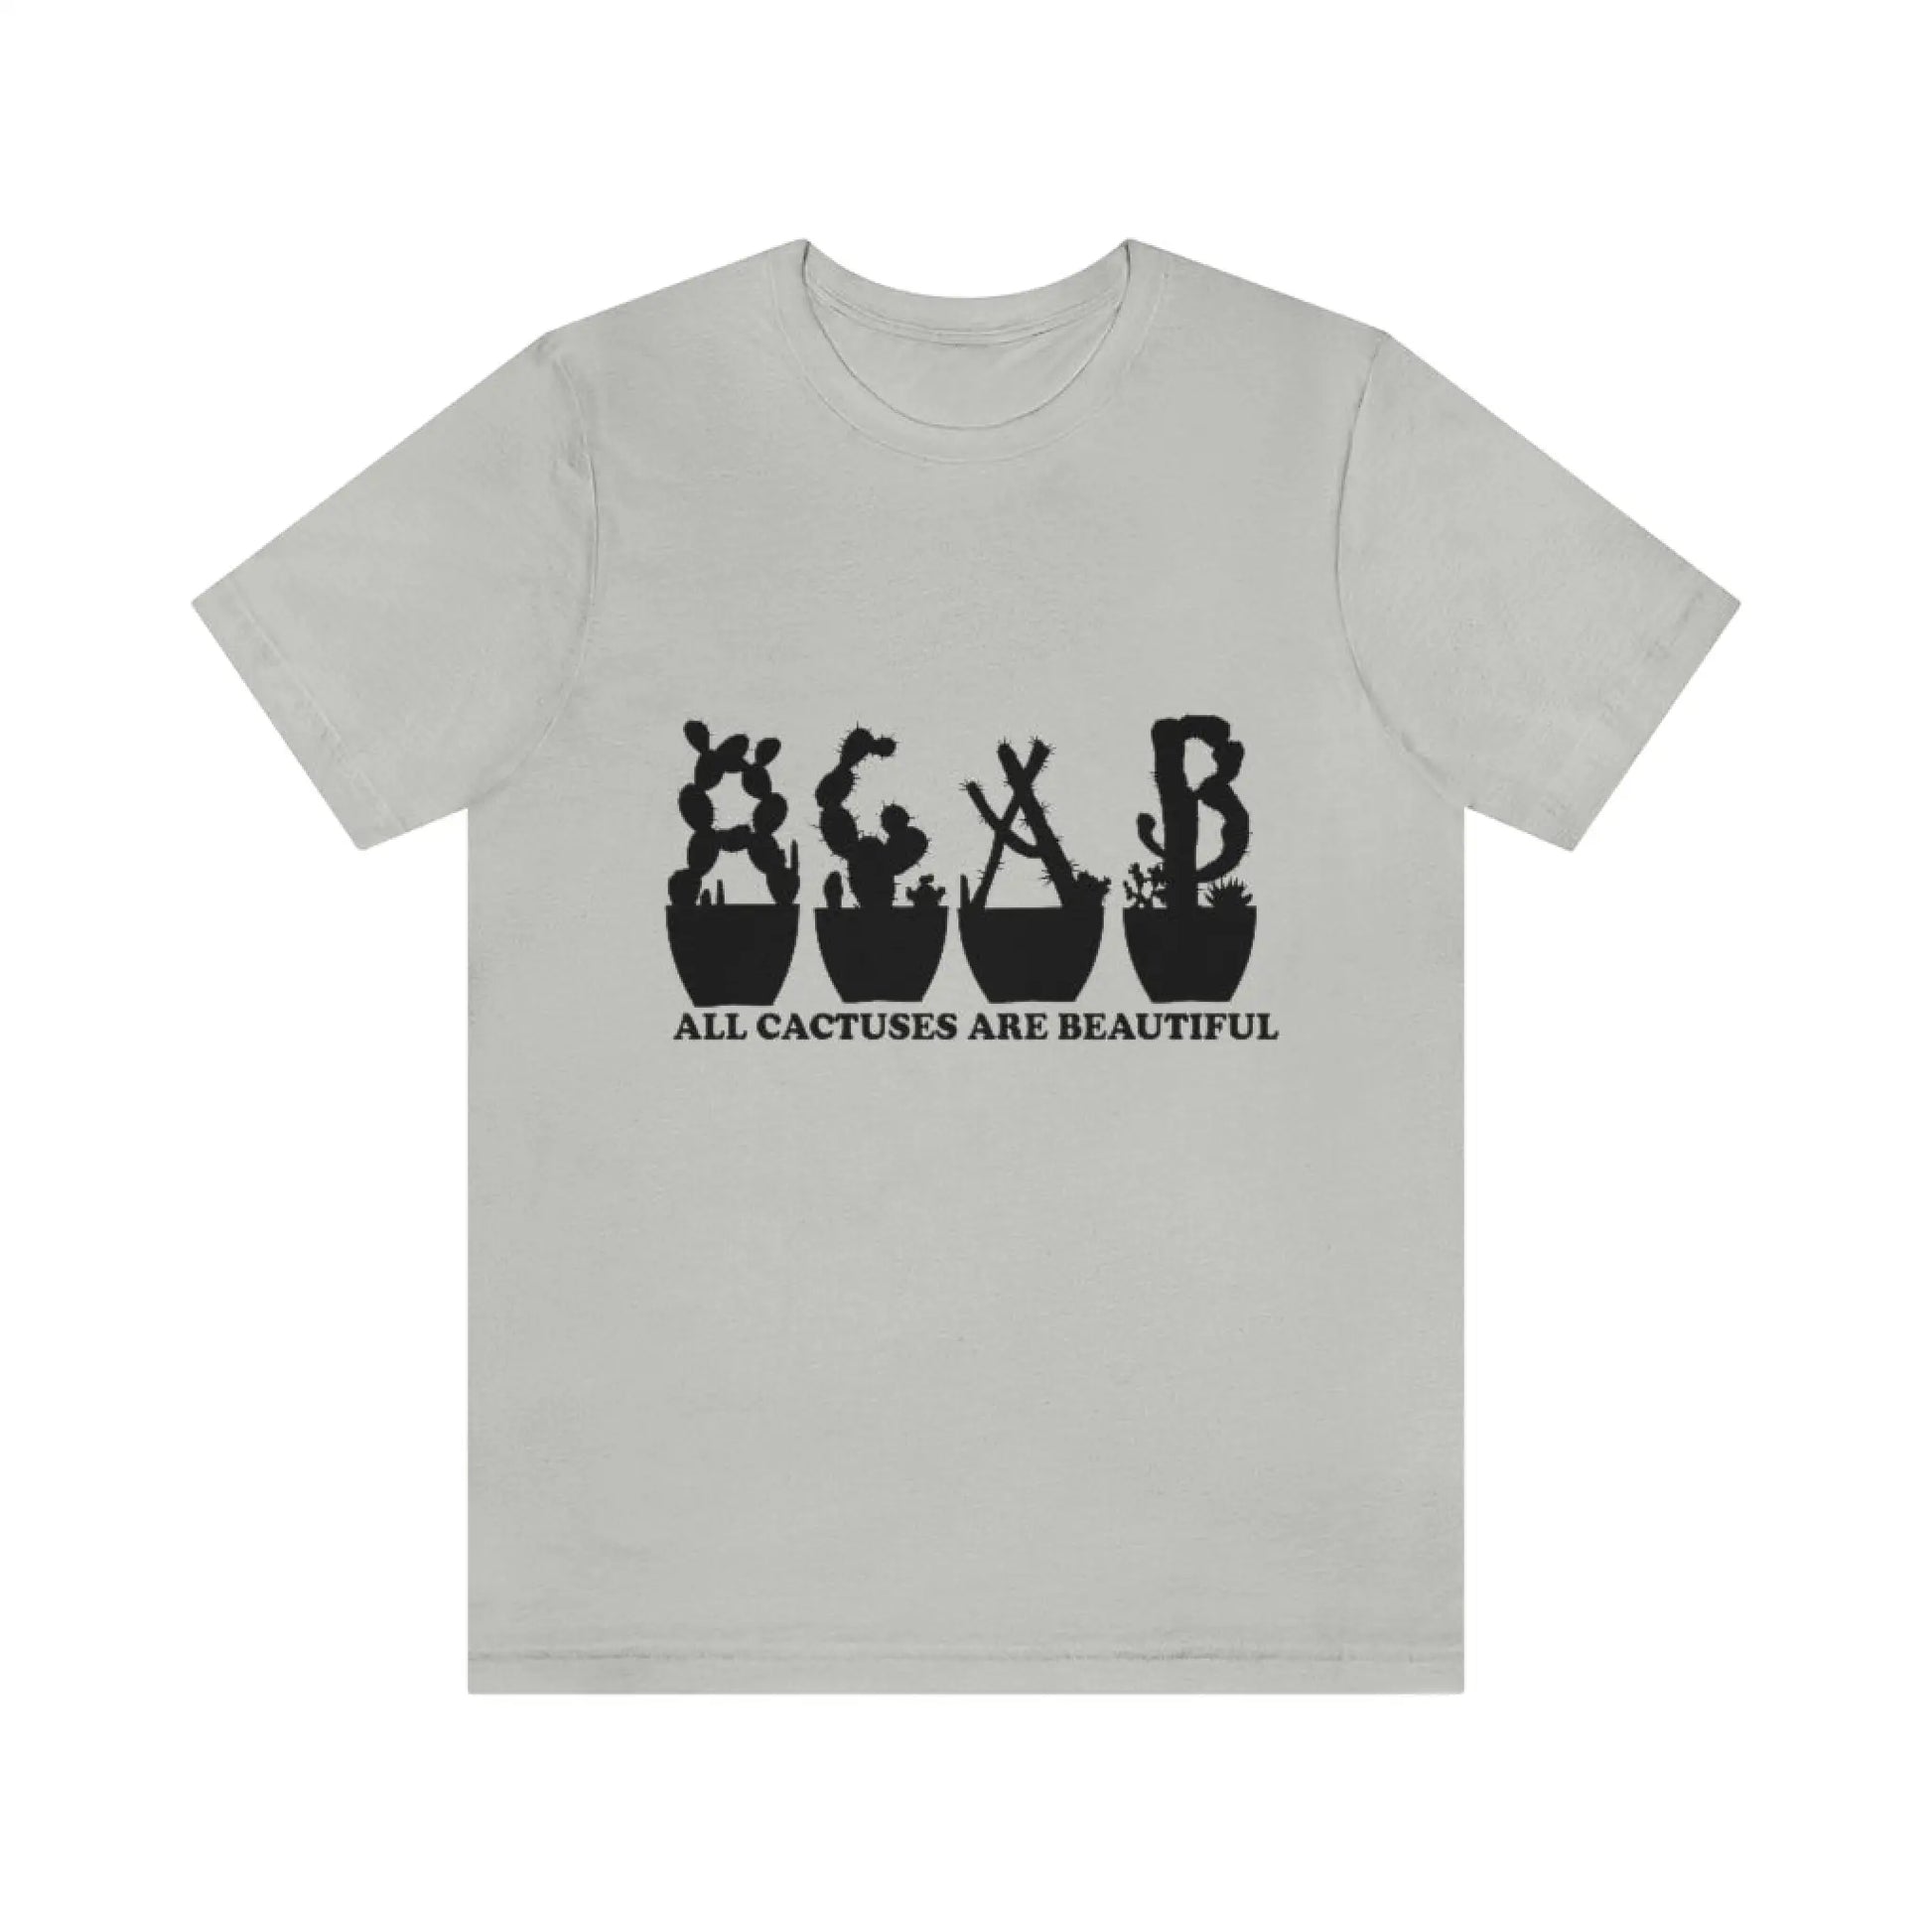 Shirts XL - All Cactuses Are Beautiful - Silver / T-Shirt